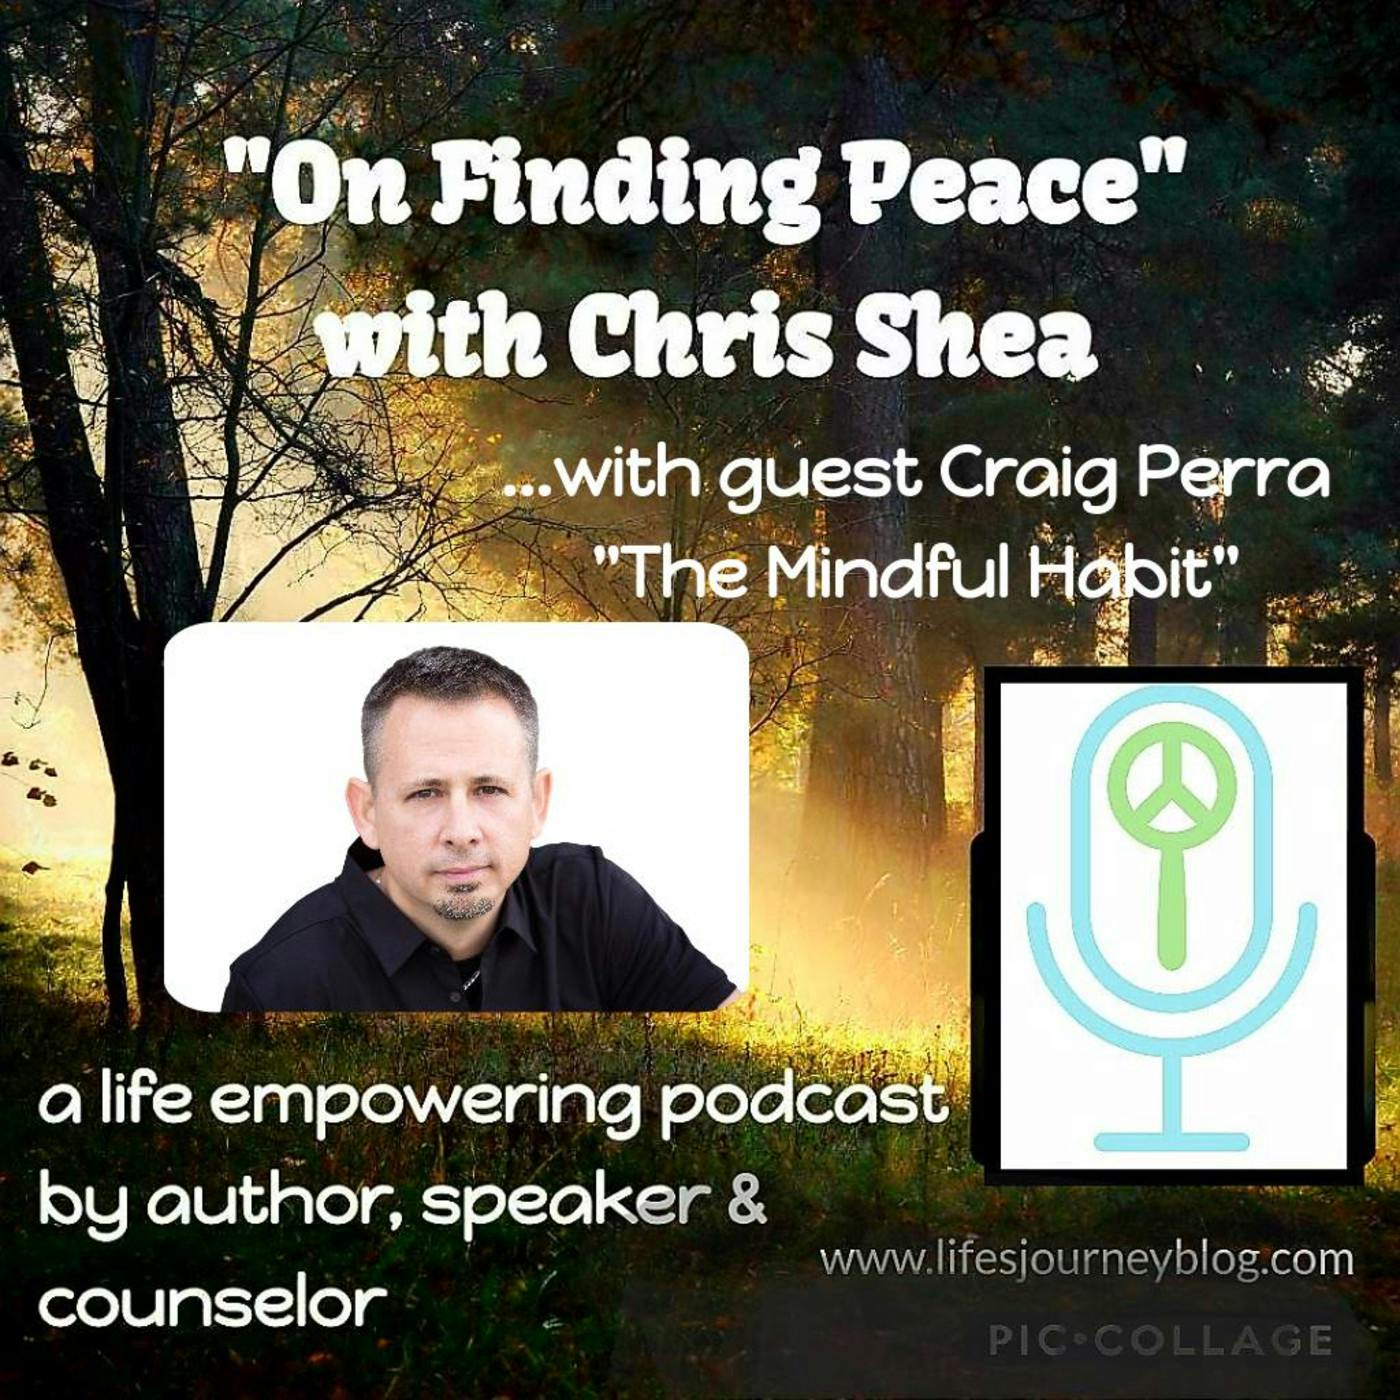 The Mindful Habit with Craig Perra